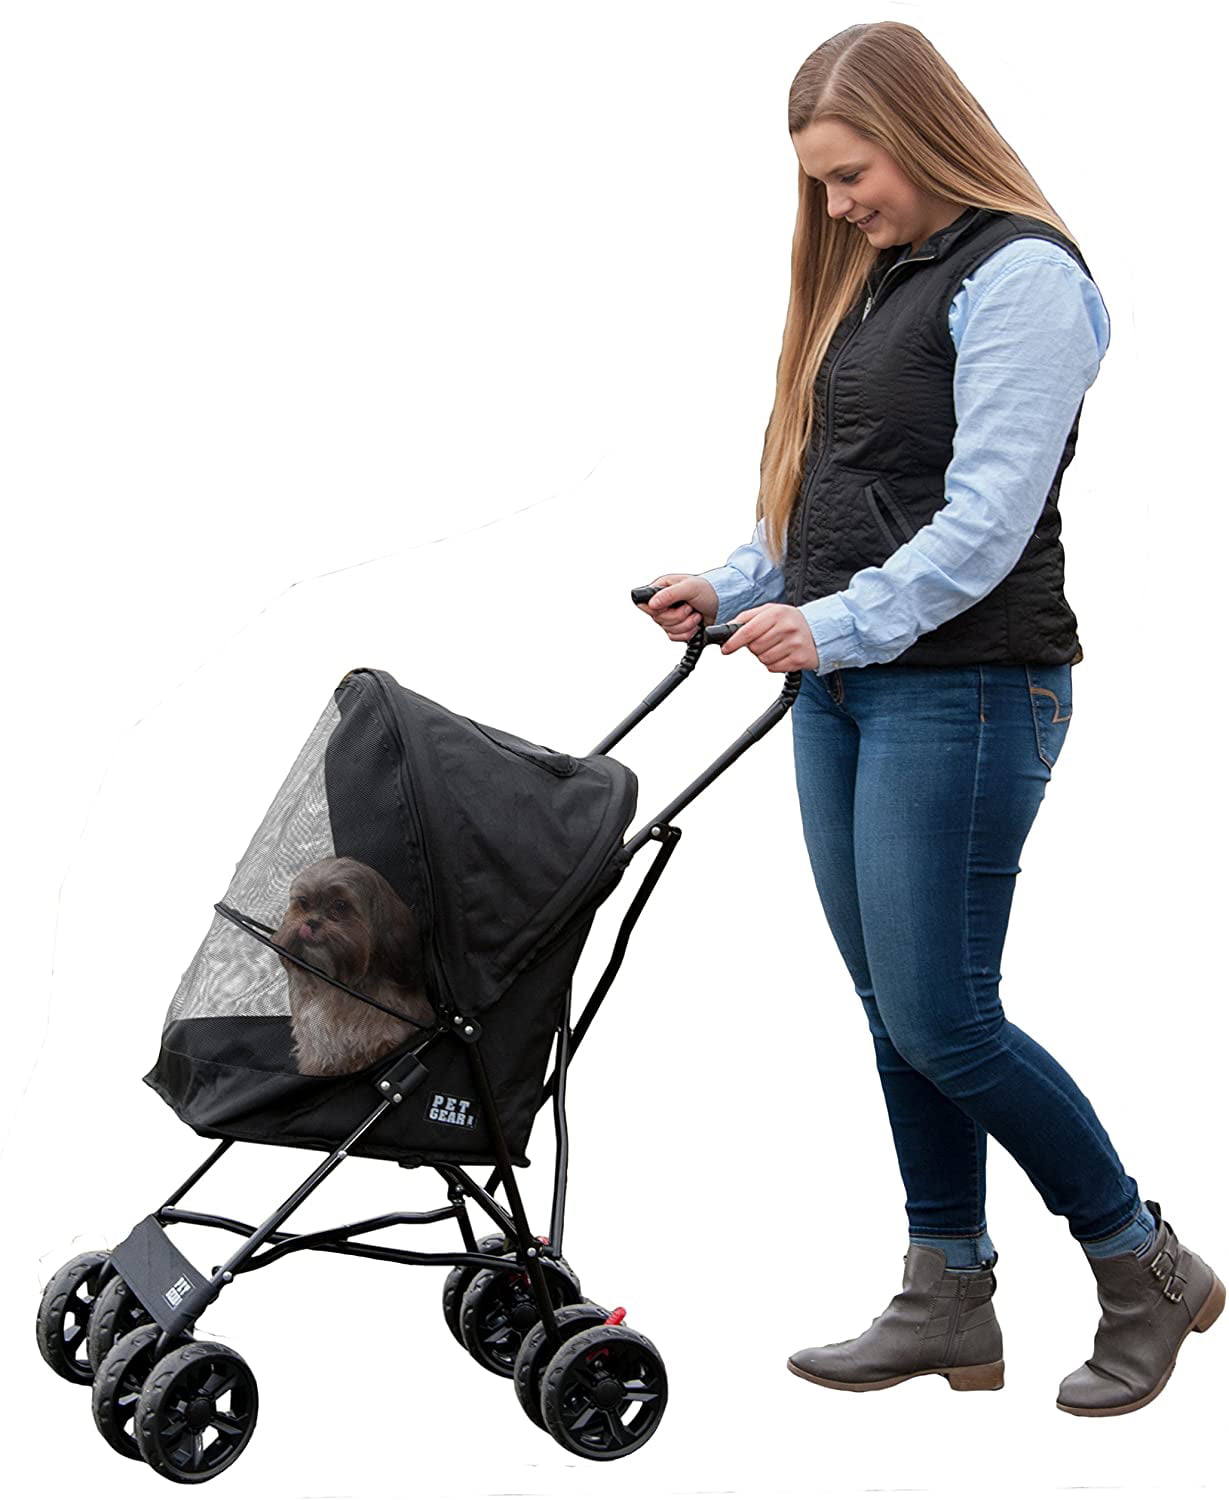 Travel Lite Pet Stroller for Cats and Dogs up to 15-pounds Black Onyx 